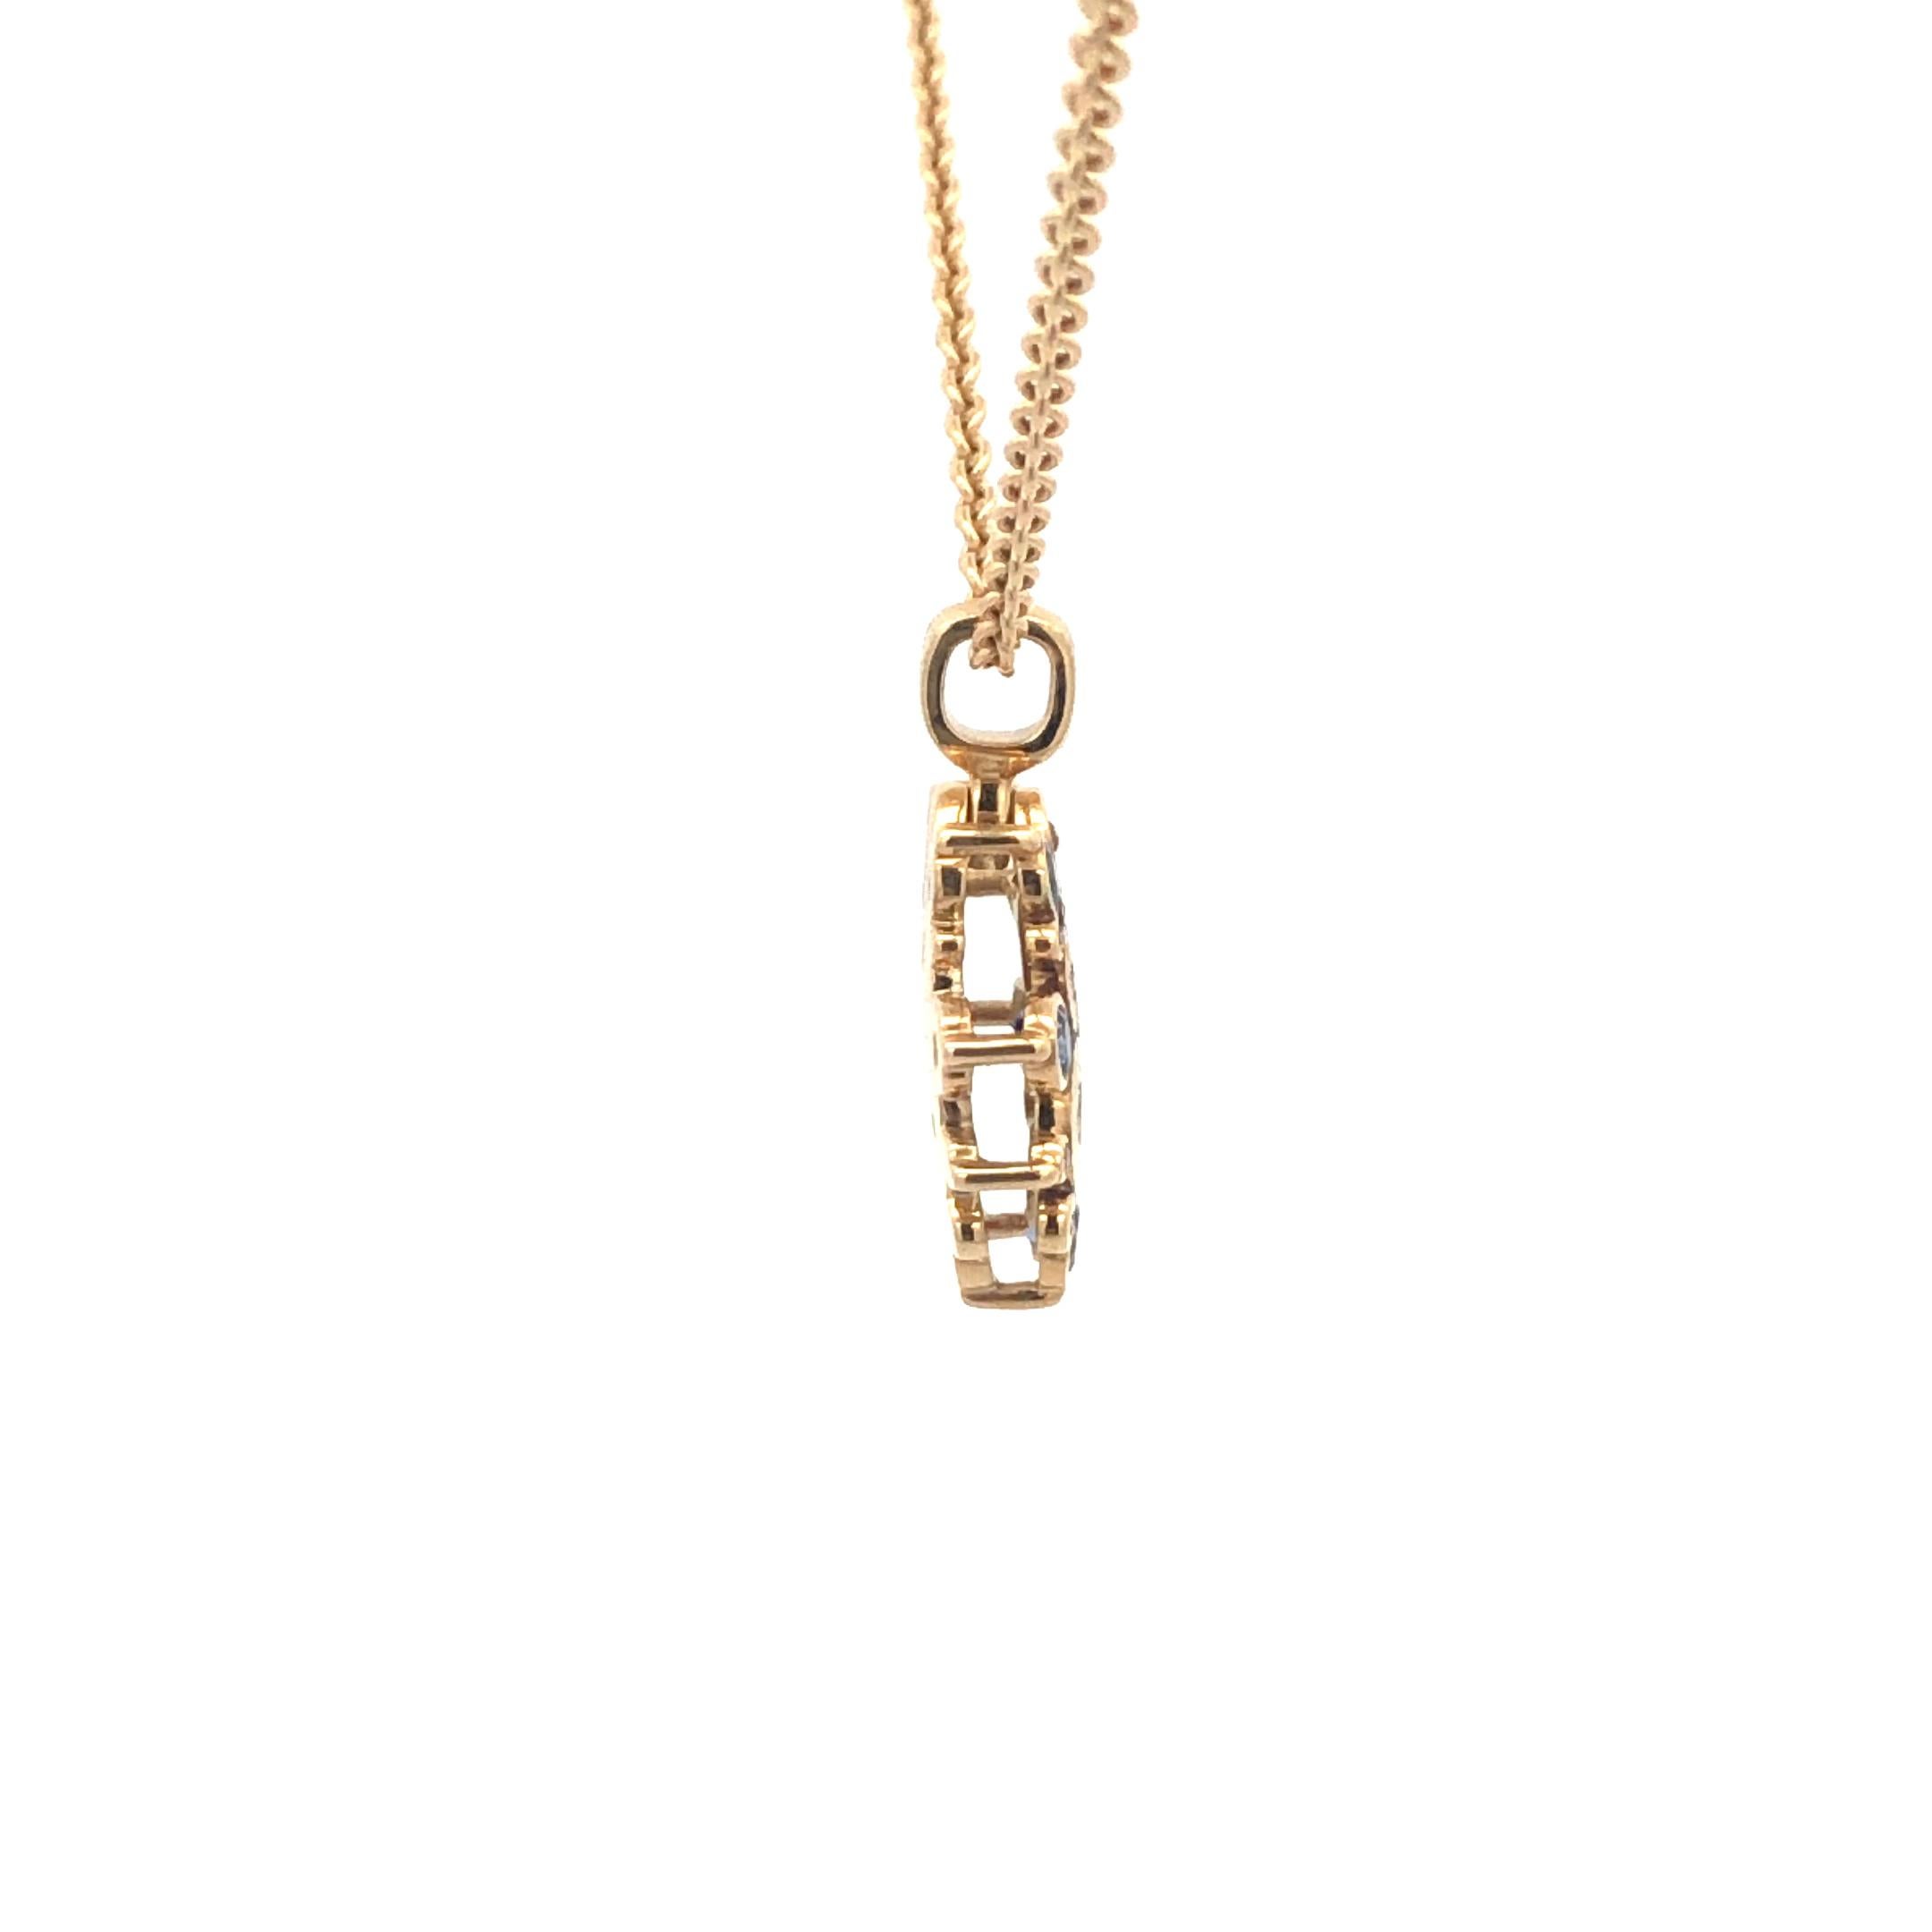 Alex Sepkus 'Ocean' Diamond and Sapphire Pendant on a 18'' Chain 18K Yellow Gold In New Condition For Sale In Dallas, TX